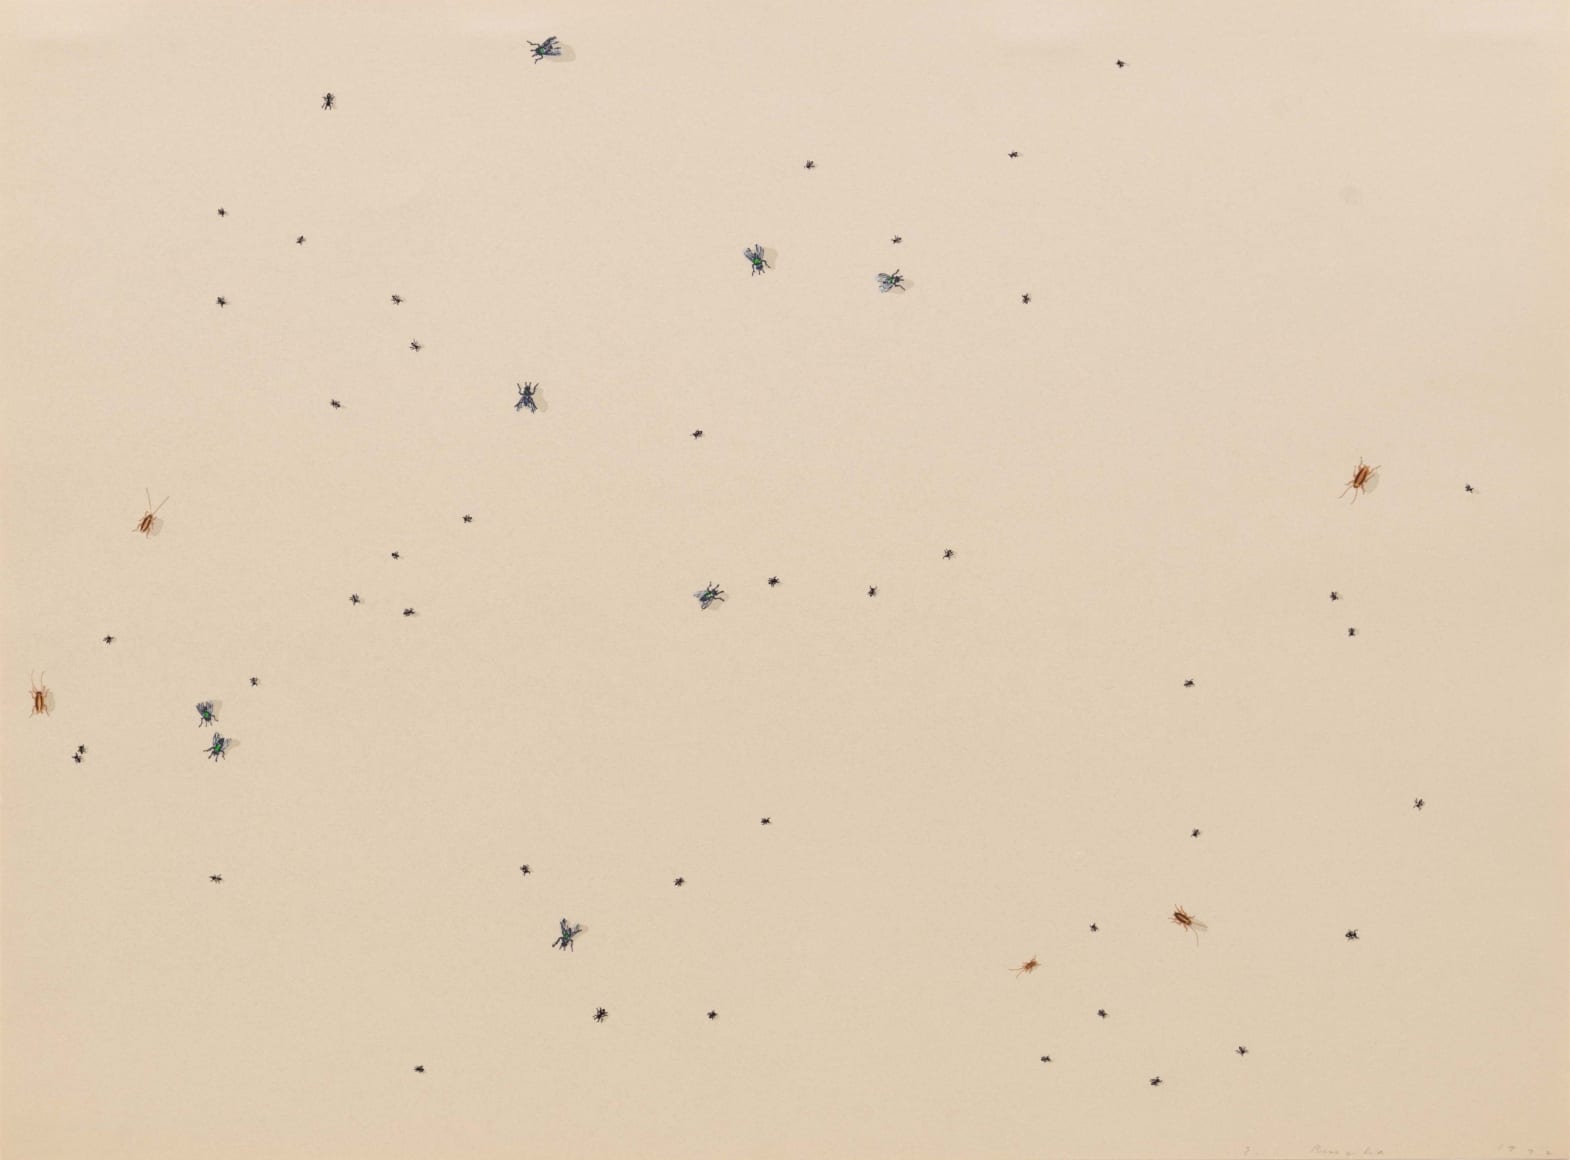 Insects by Edward Ruscha